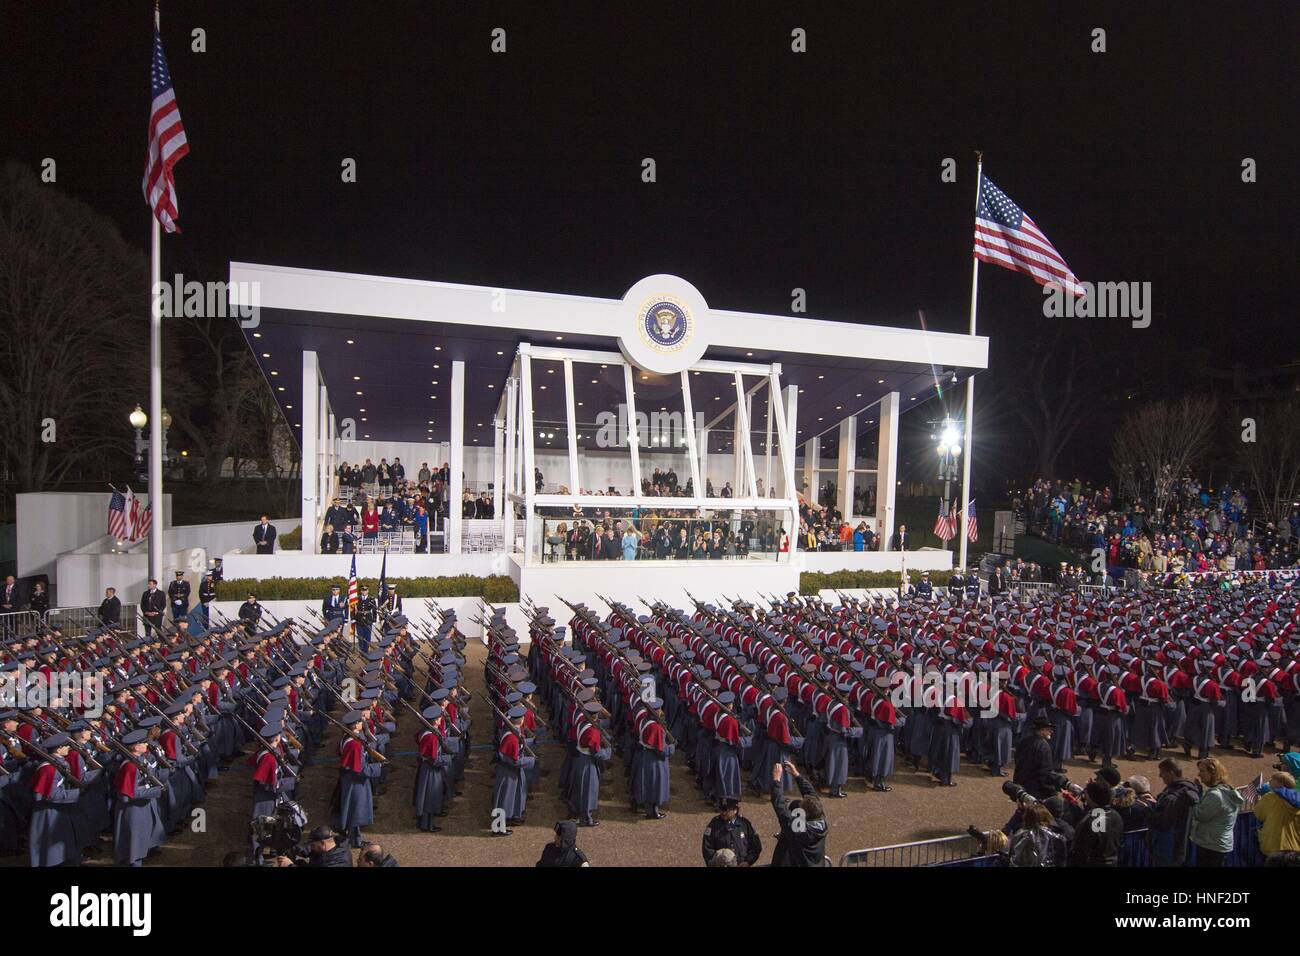 U.S. President Donald Trump and Vice President Mike Pence observe the 58th Presidential Inauguration Parade from the White House reviewing stand January 20, 2017 in Washington, DC. Stock Photo